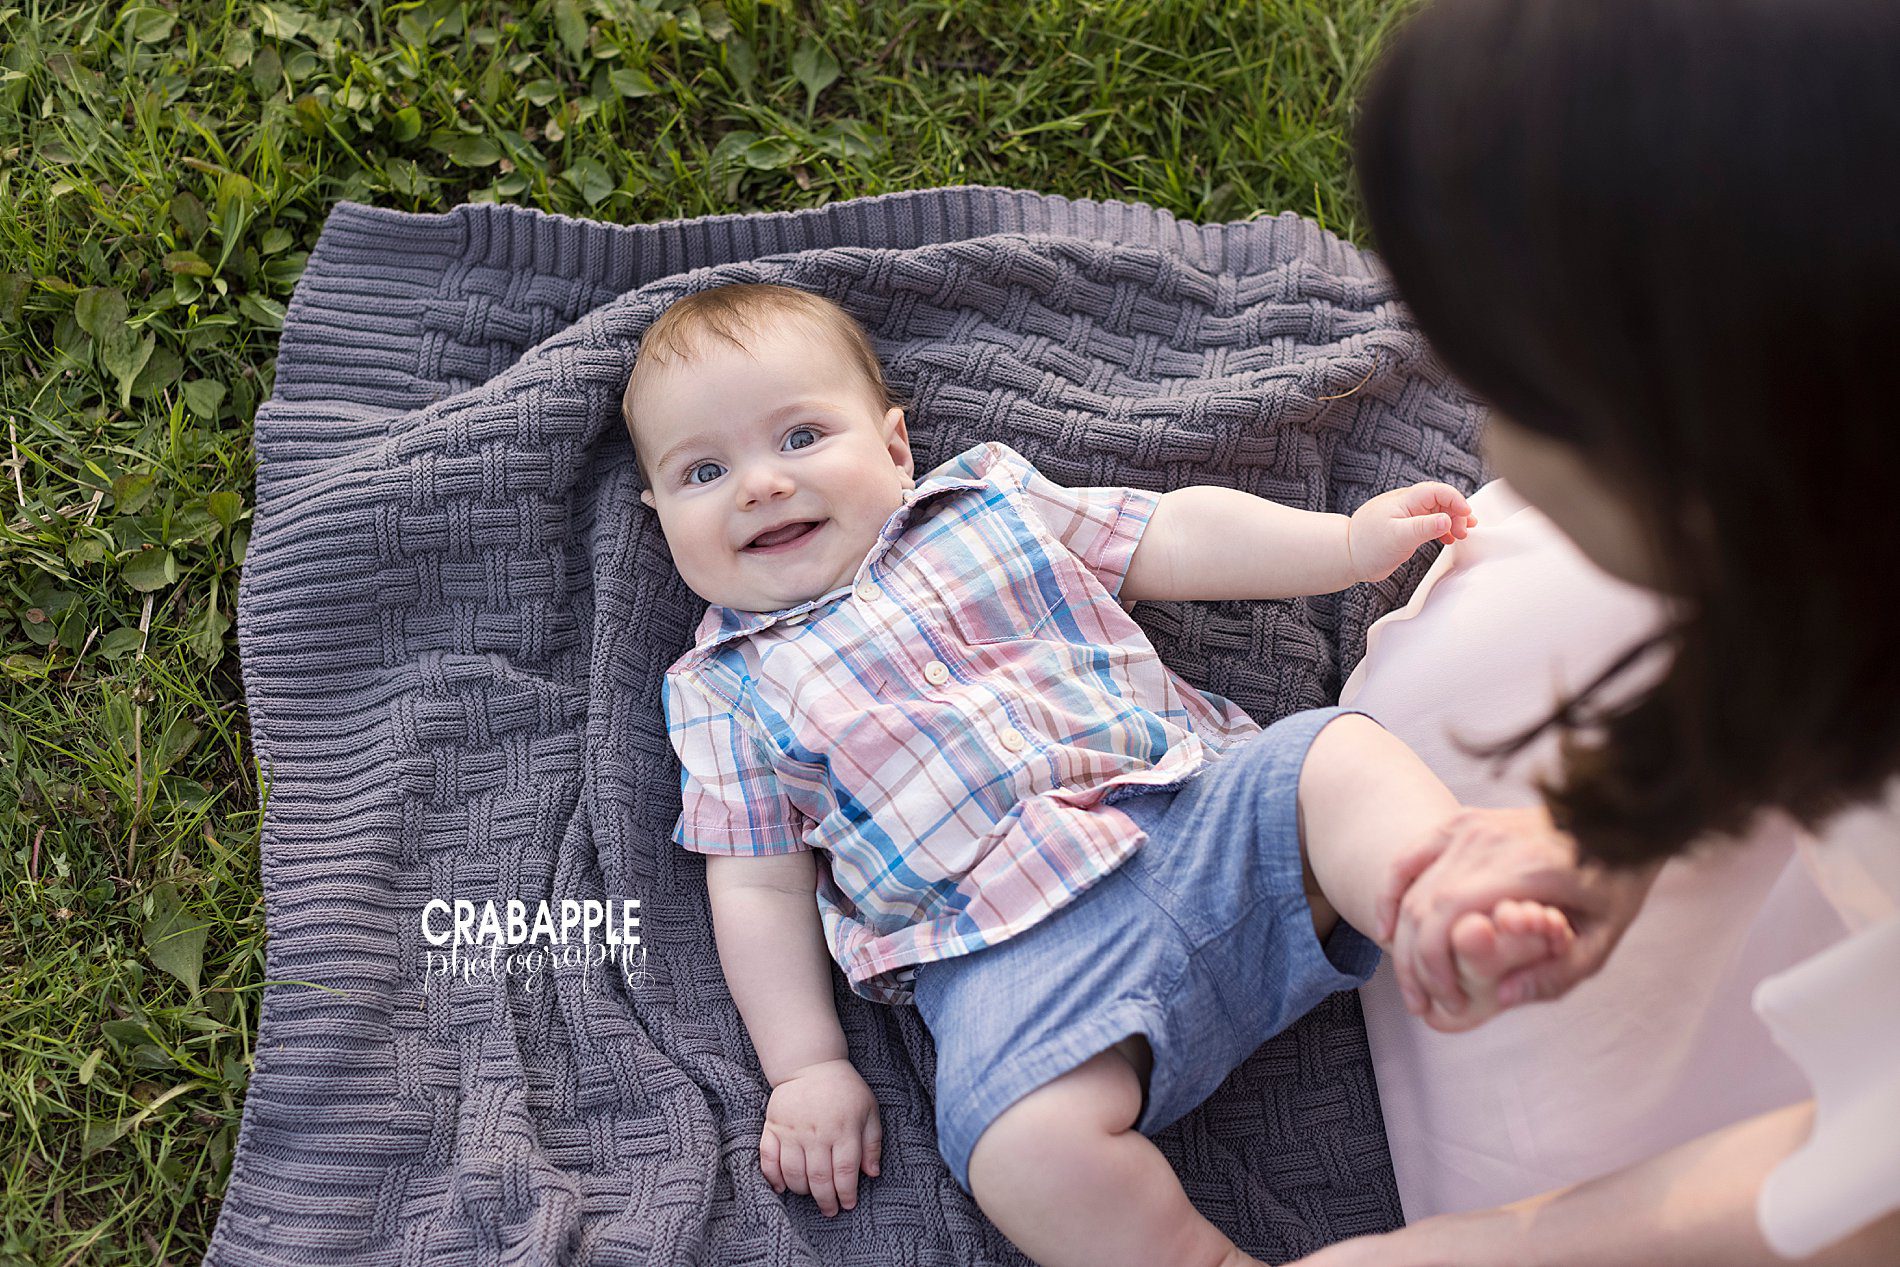 6 month old baby photos outside during spring.